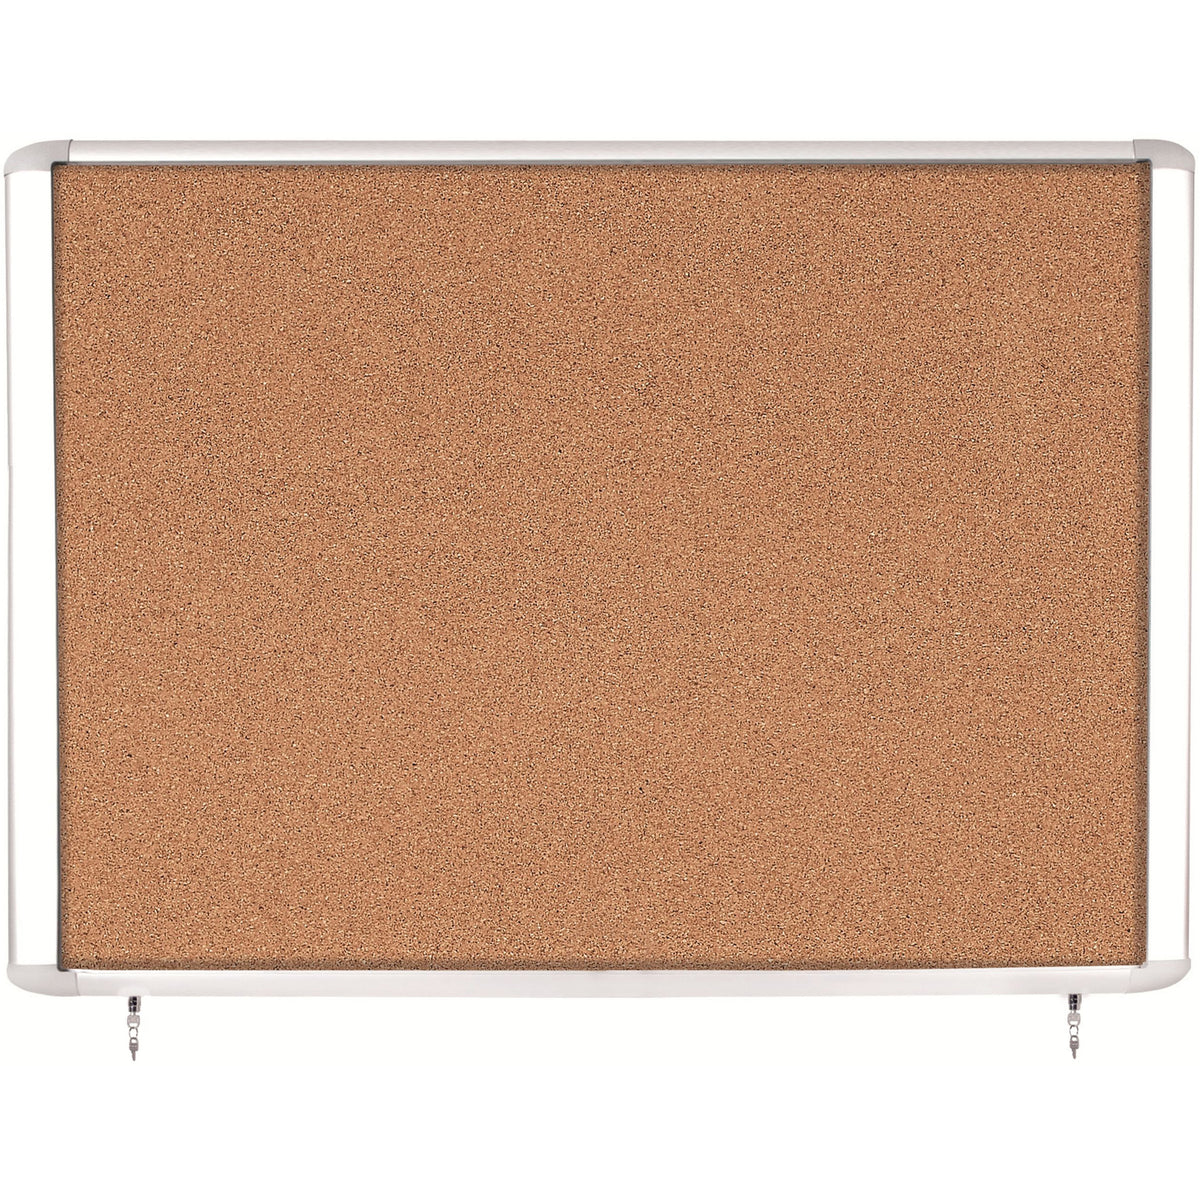 VT380601760 Outdoor Enclosed Top Hinged Door Locking Cork Bulletin Board, Weather Resistant Wall Mount Message Corkboard, 39" x 48", Aluminum Frame by MasterVision